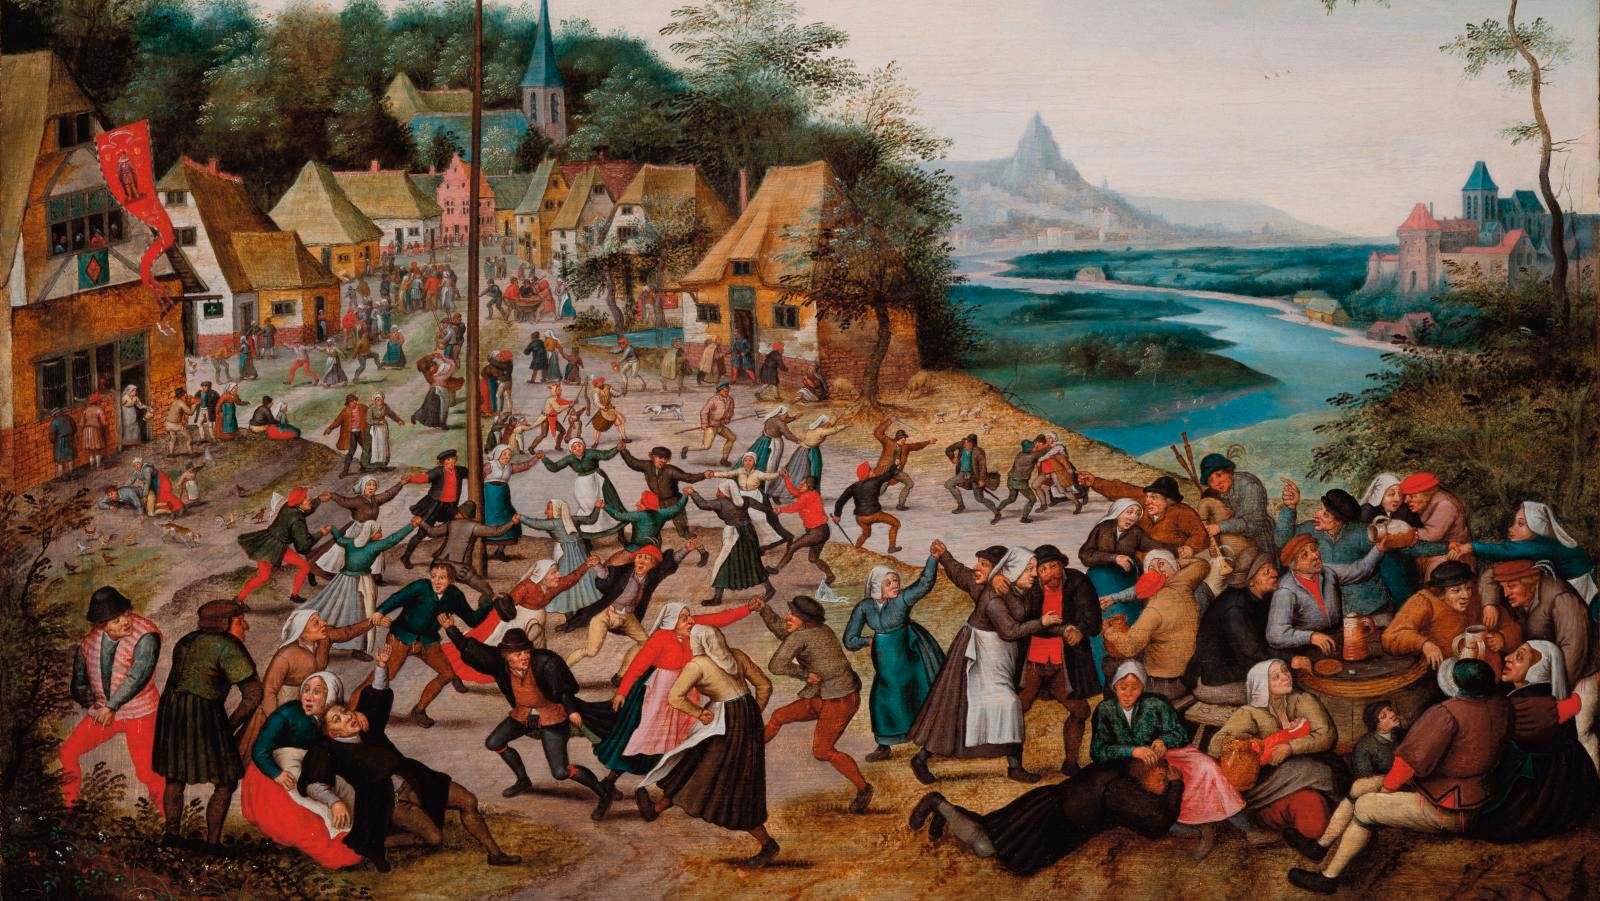 Pieter Bruegel the Younger (1564-1636), Kermesse of Saint George with the Dance Around... BRAFA: More Appealing Than Ever